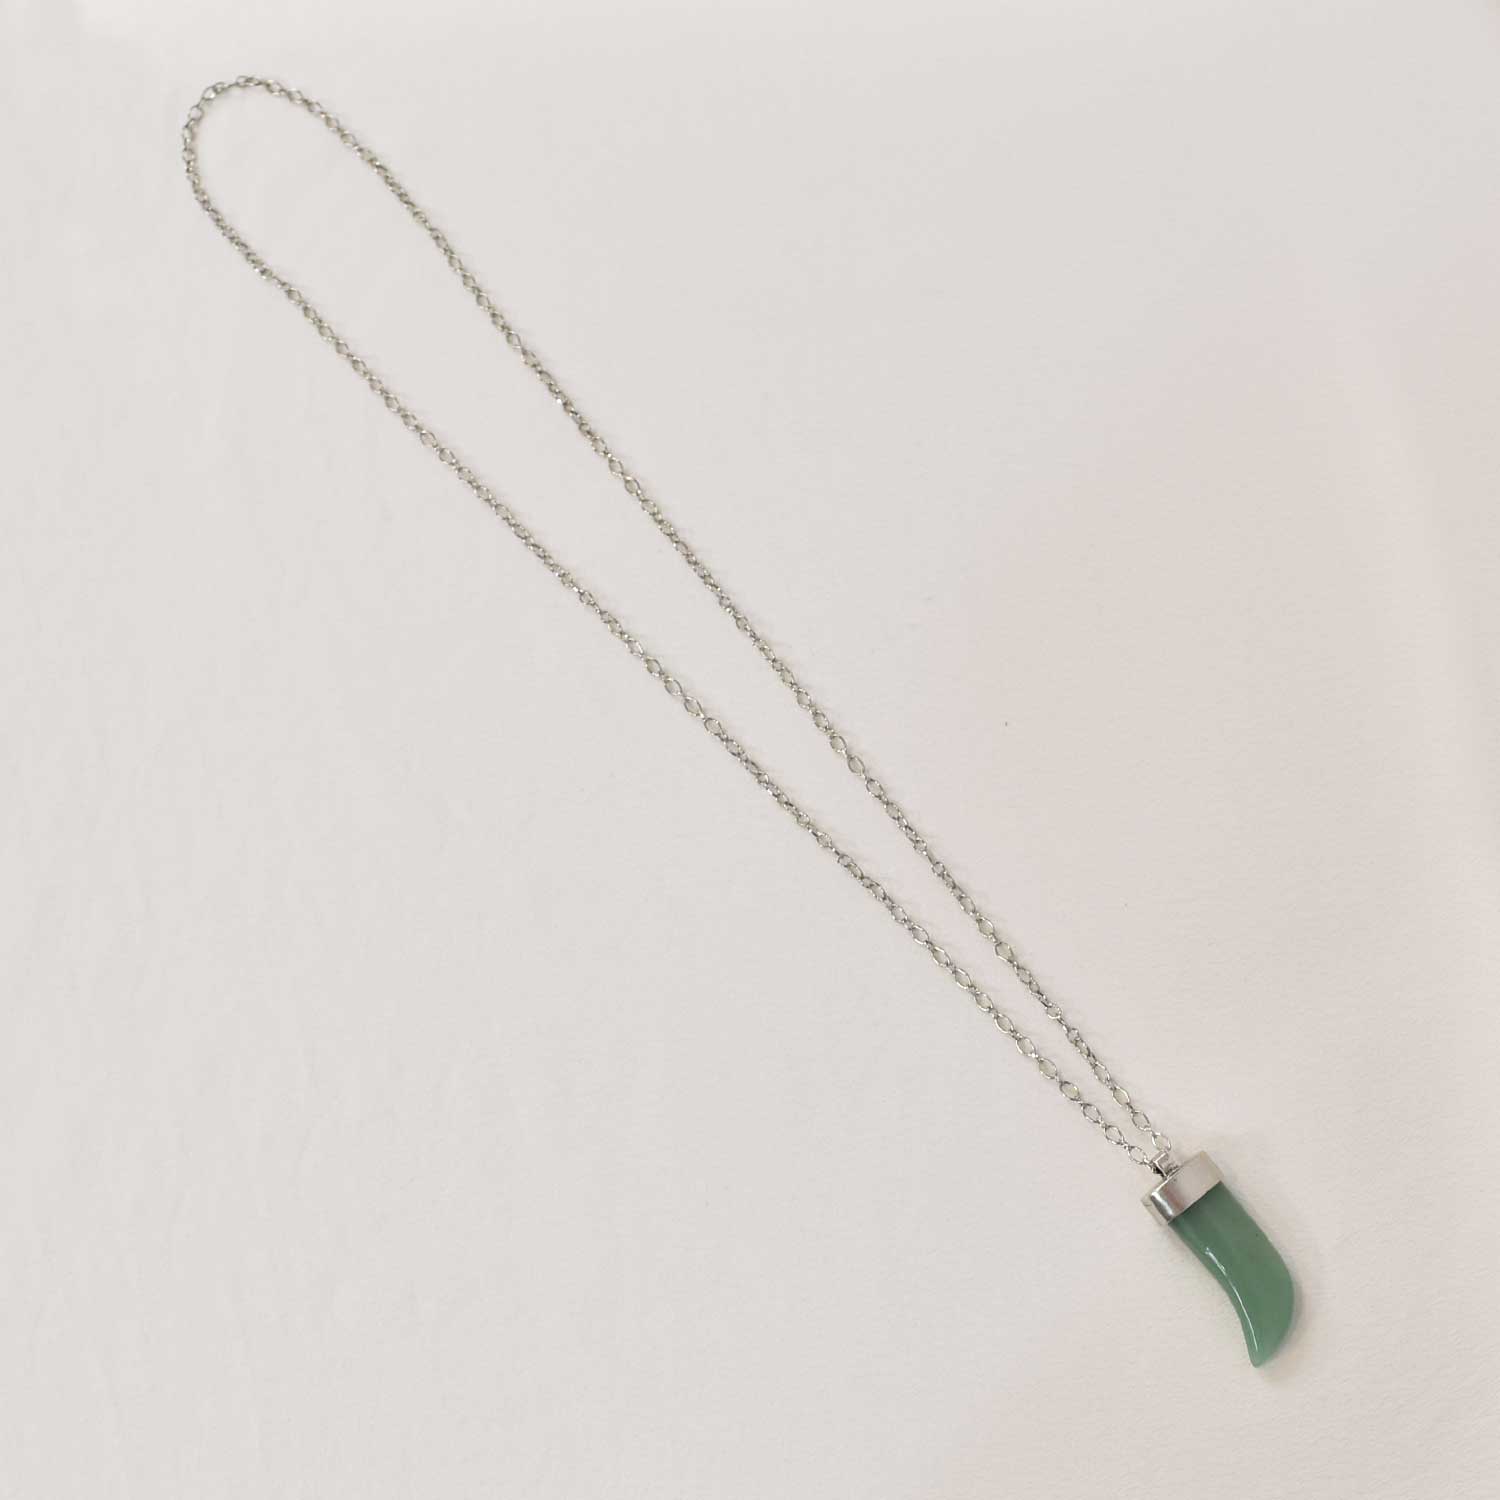 Green horn necklace